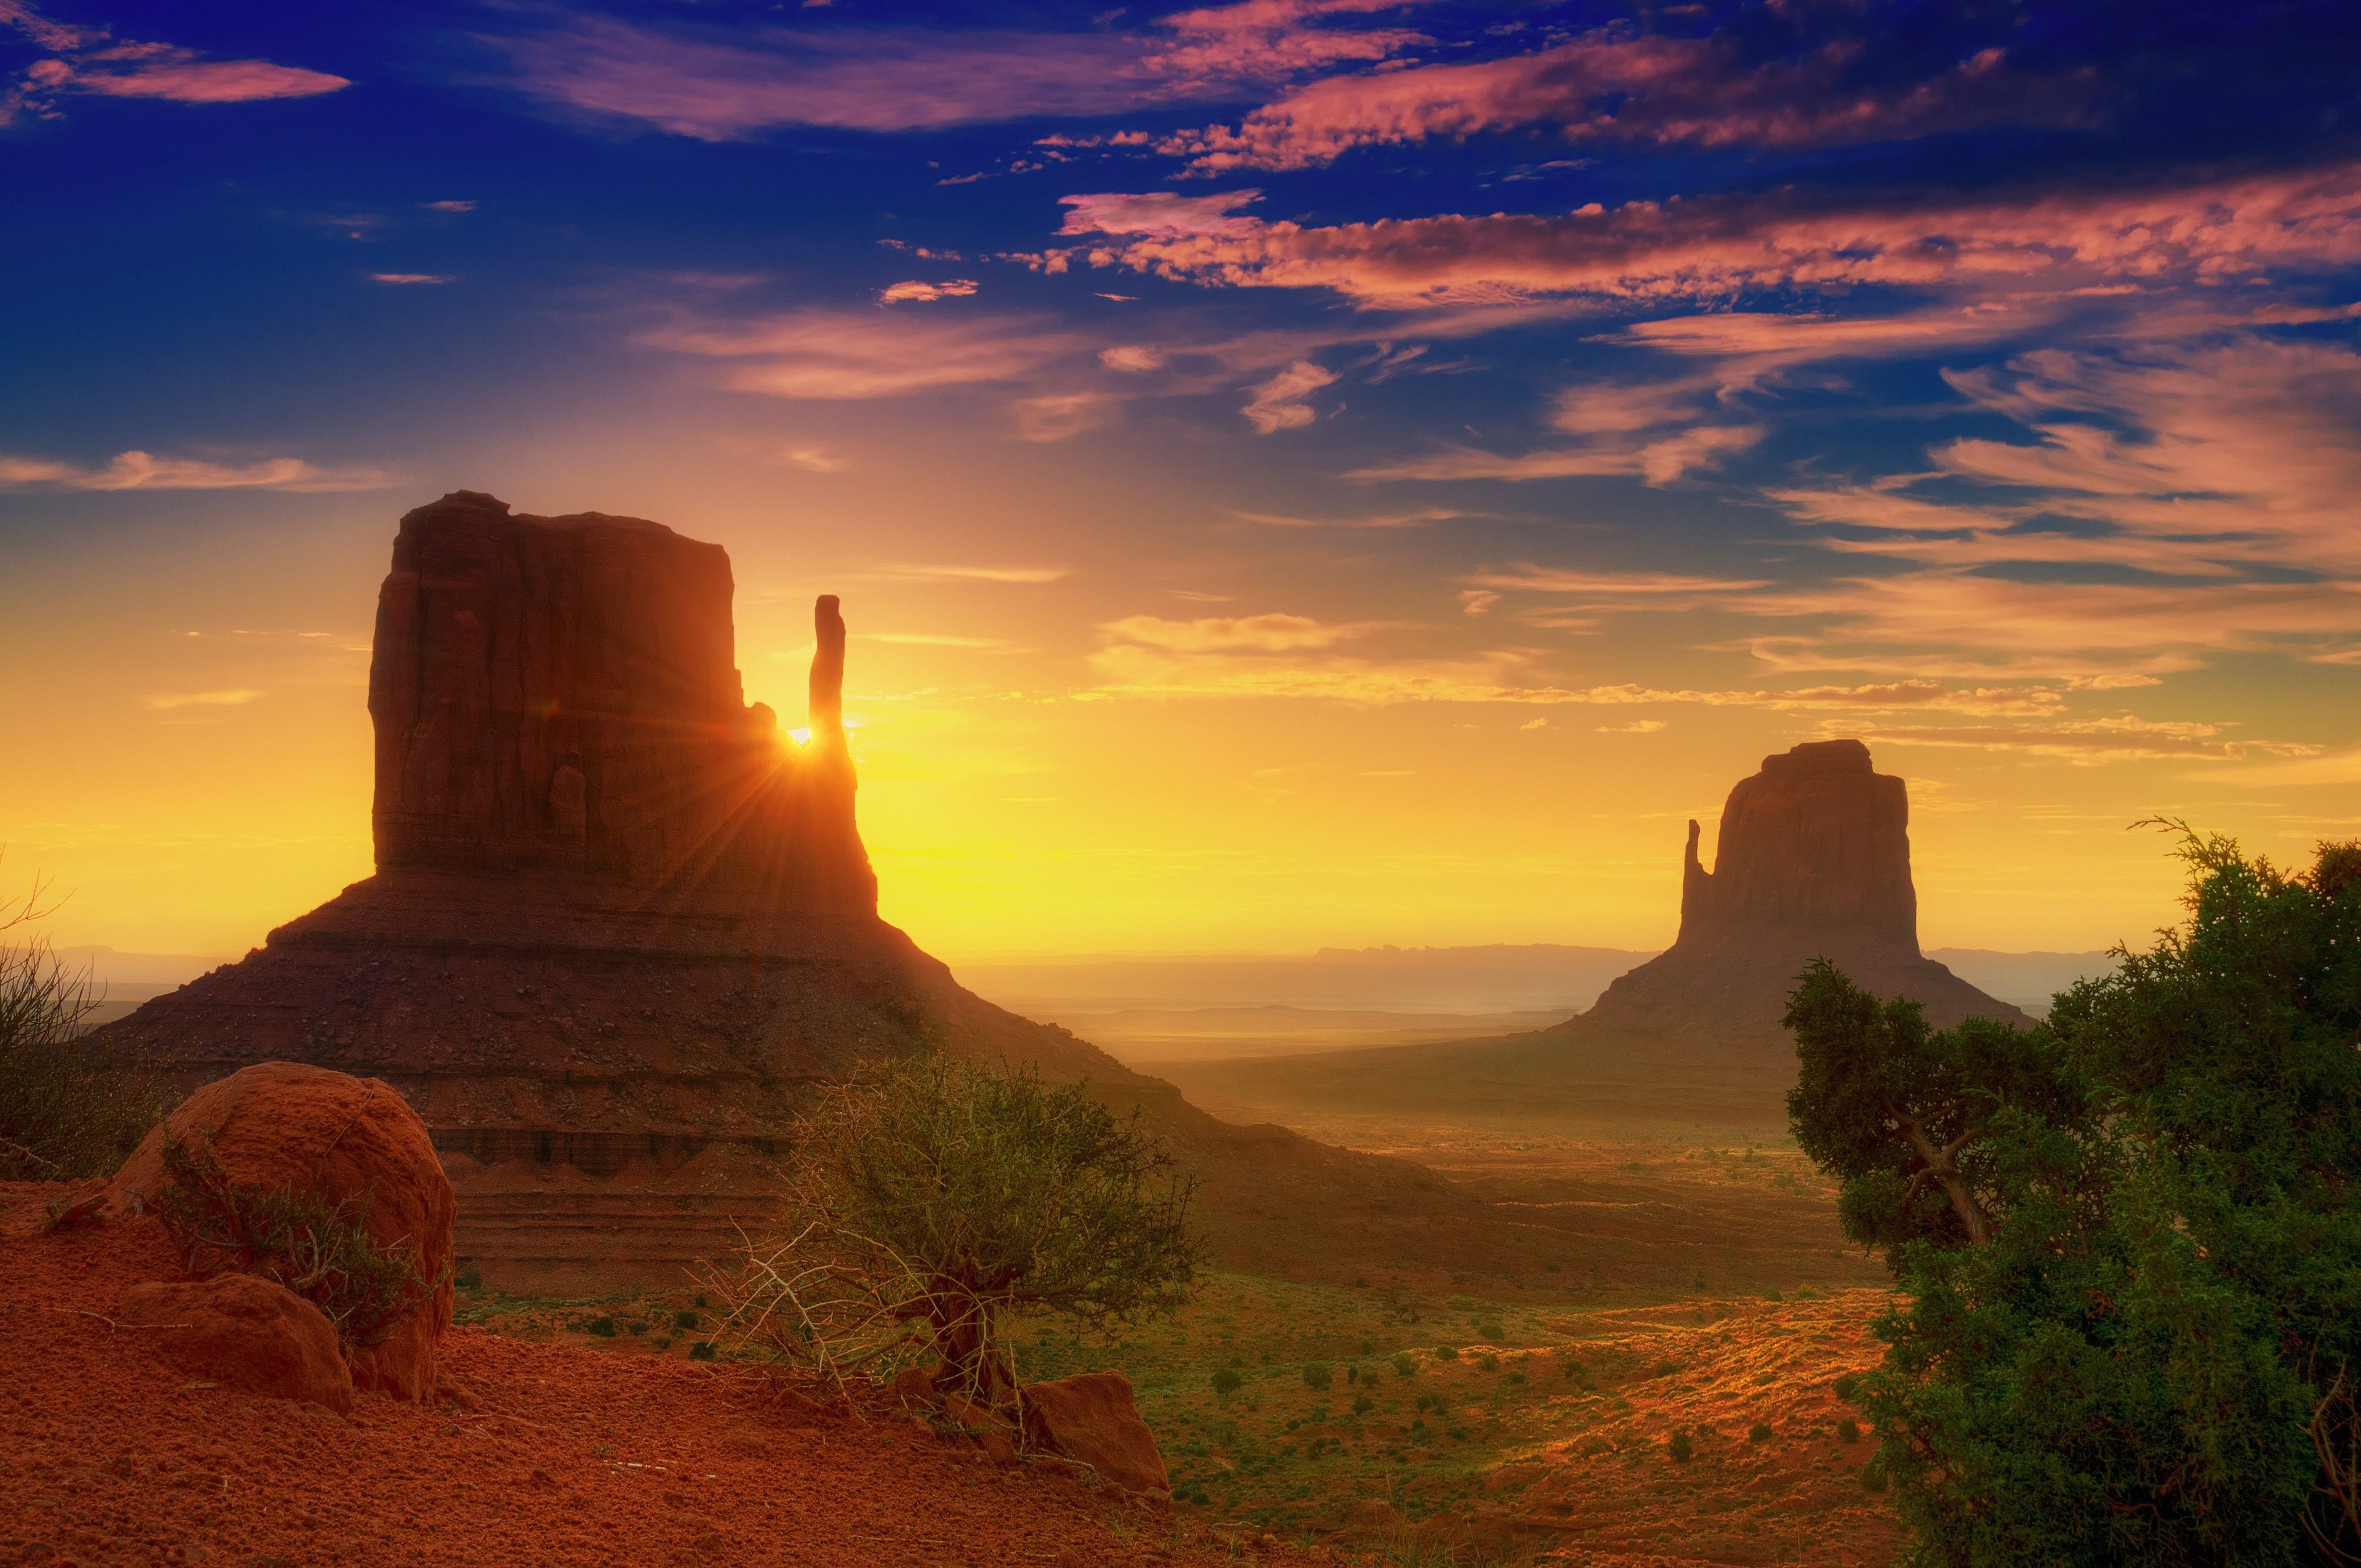 Monument Valley HD Wallpaper